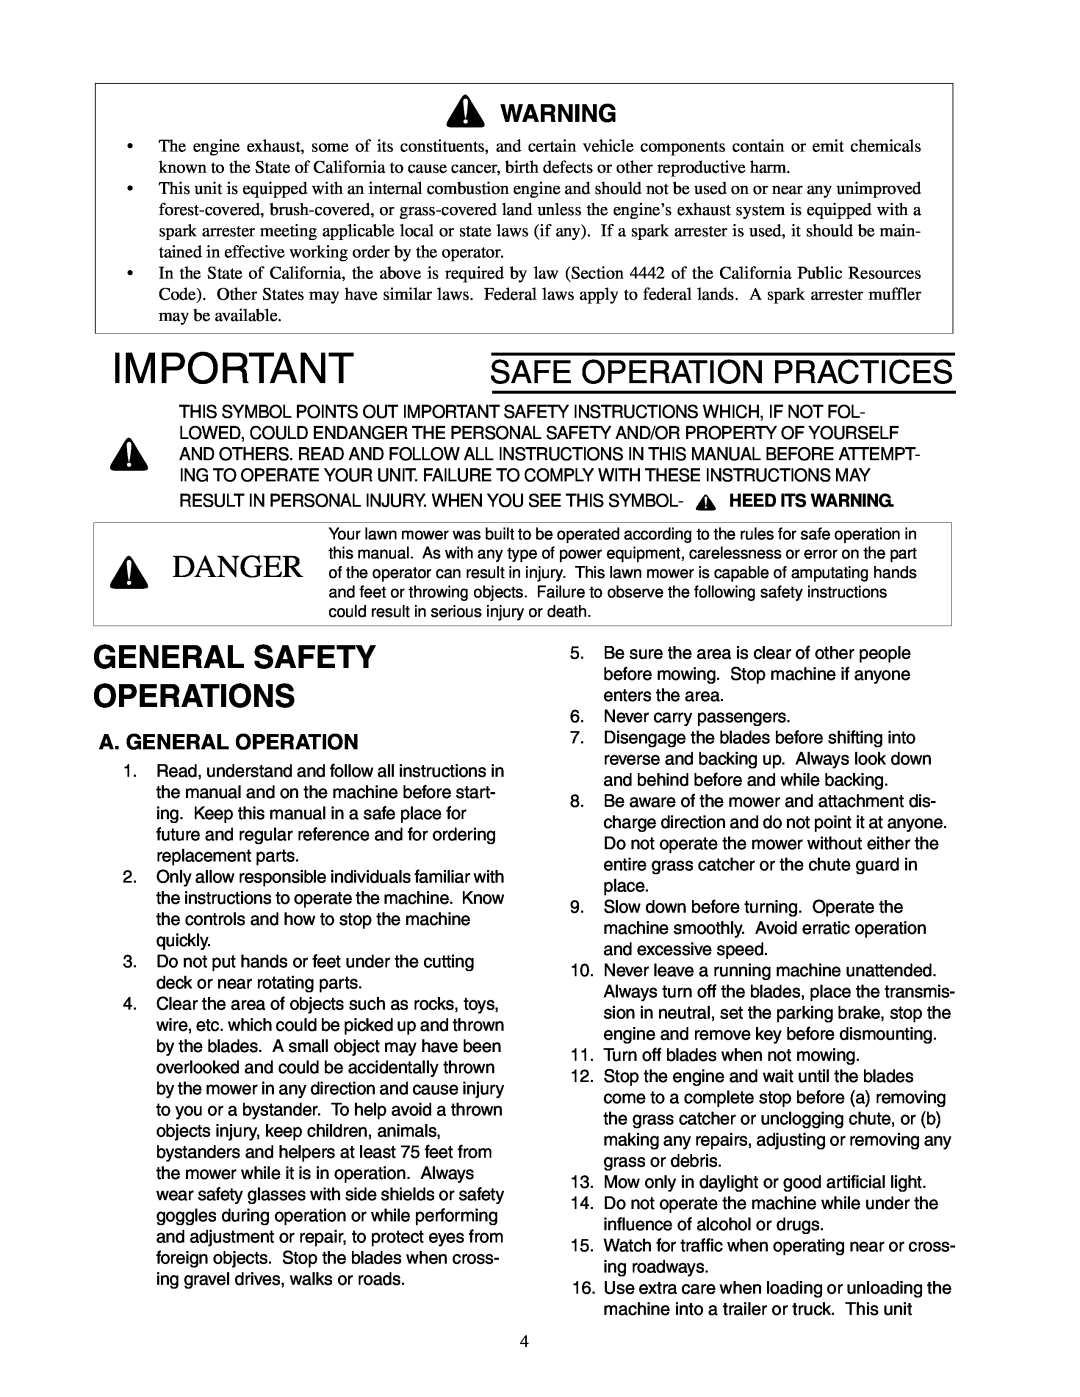 Cub Cadet 23HP Z-Force 60 service manual General Safety Operations, A. General Operation, Safe Operation Practices 